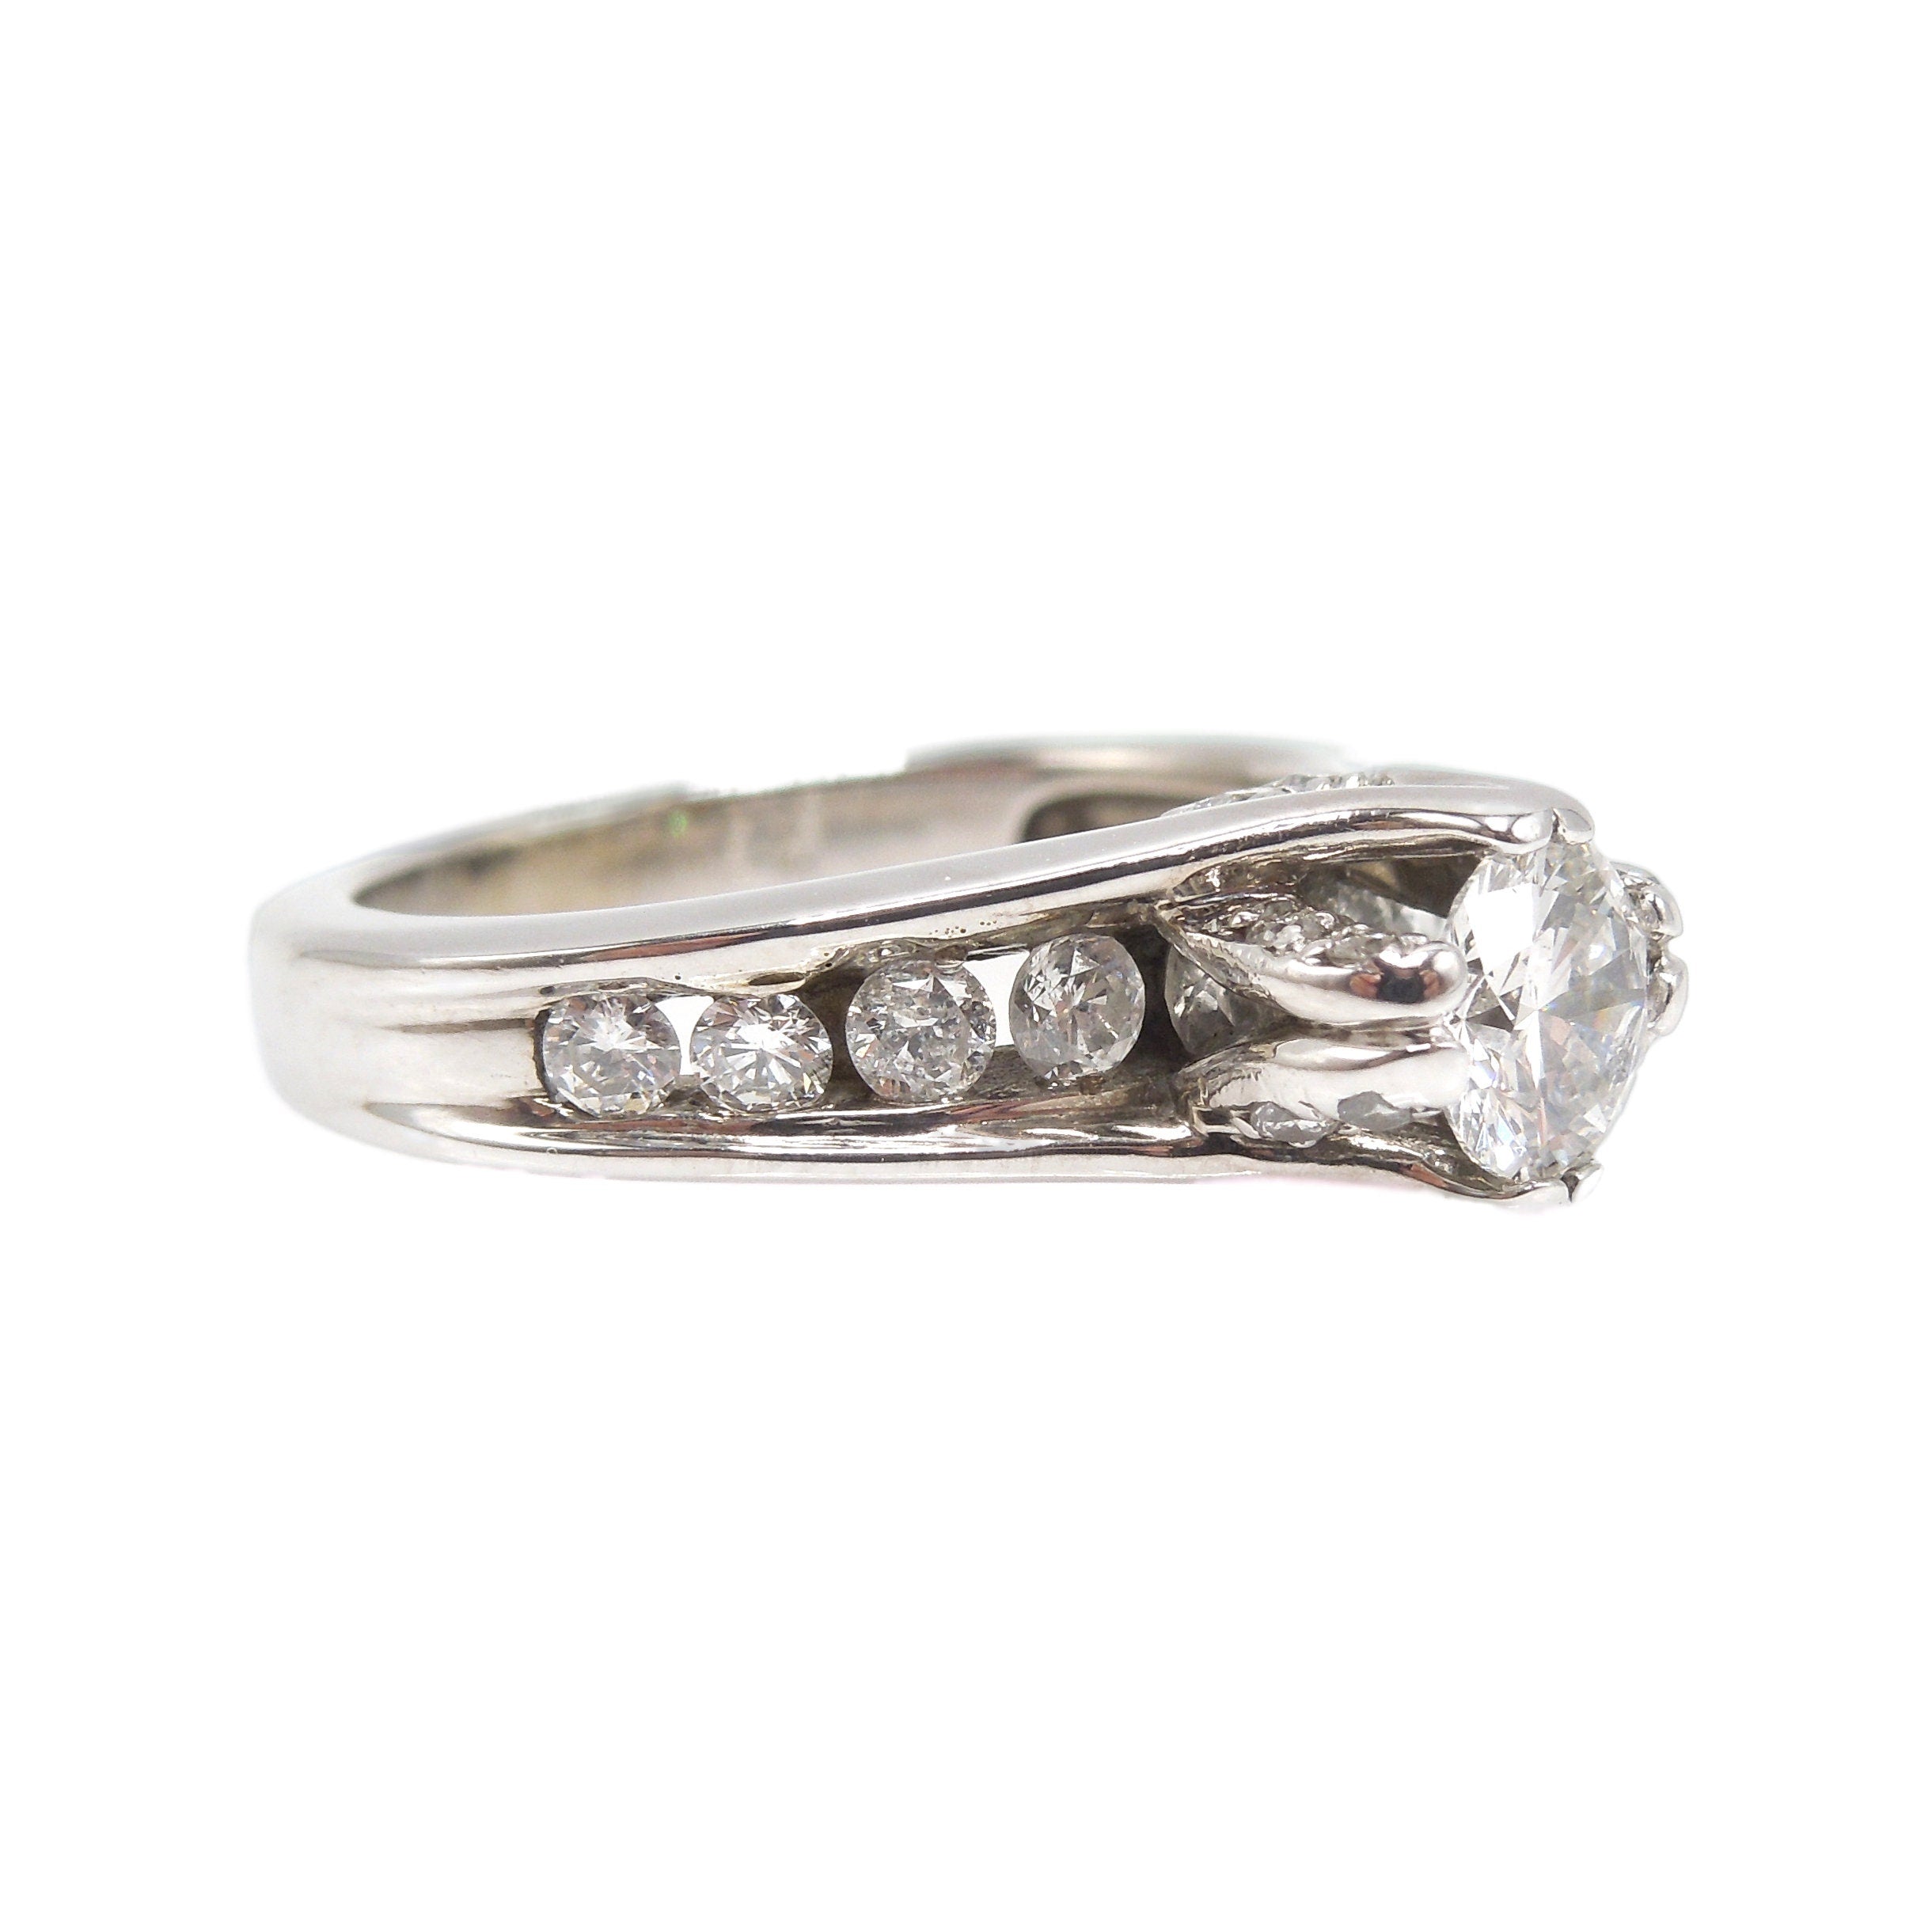 Half Carat Diamond Accented and Encrusted Engagement Ring in 14K White Gold